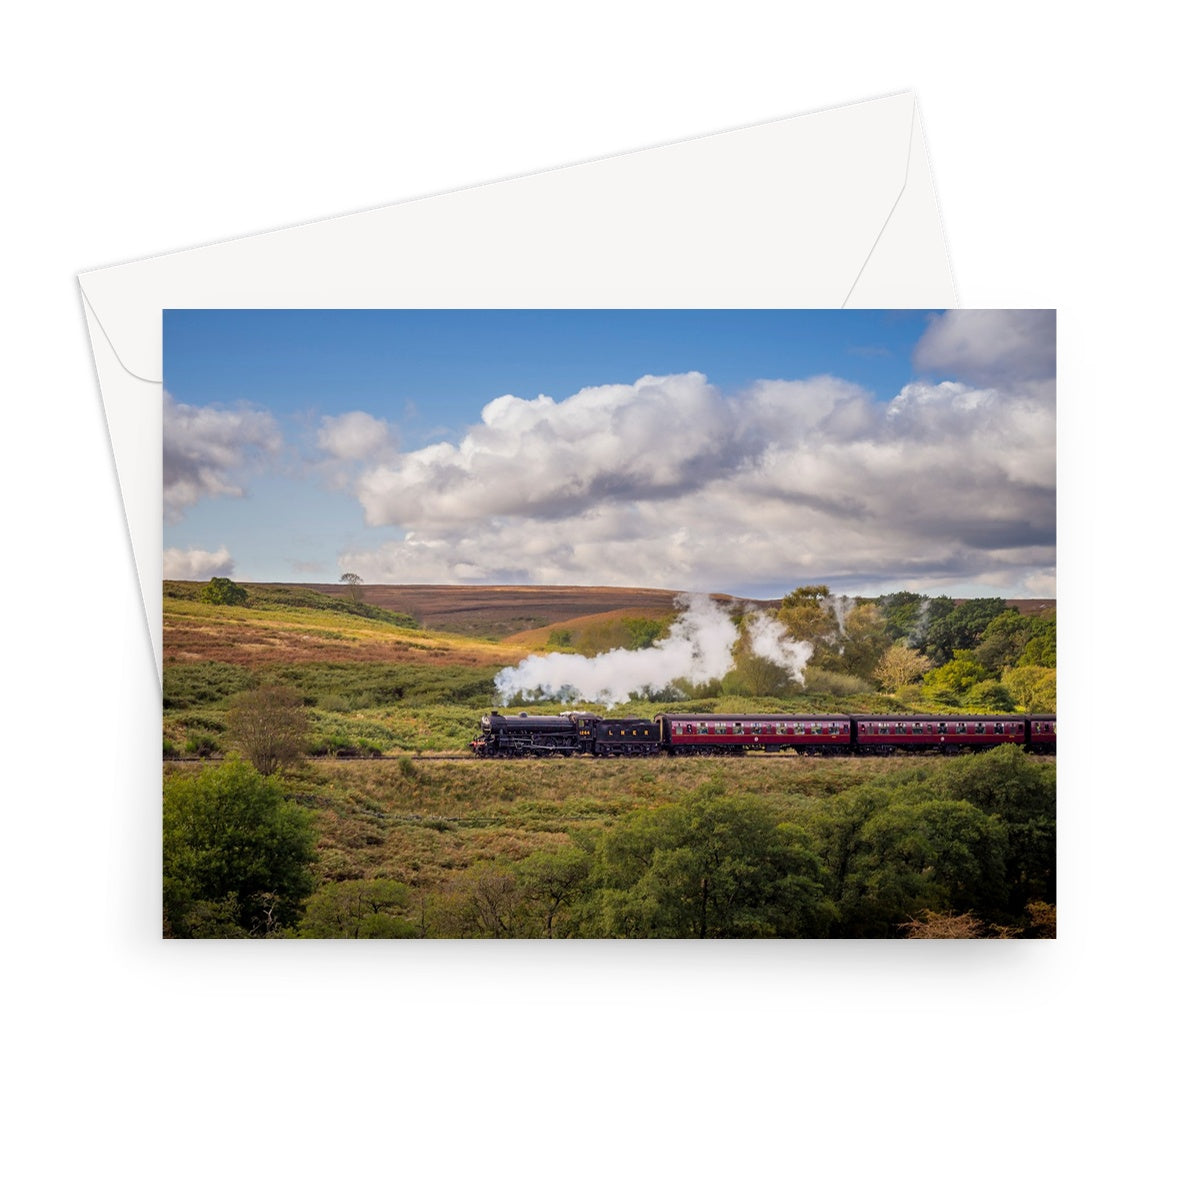 Steam Train: LNER Thompson Class B1 No. 1264  on the North Yorkshire Moors in summer. UK Greeting Card